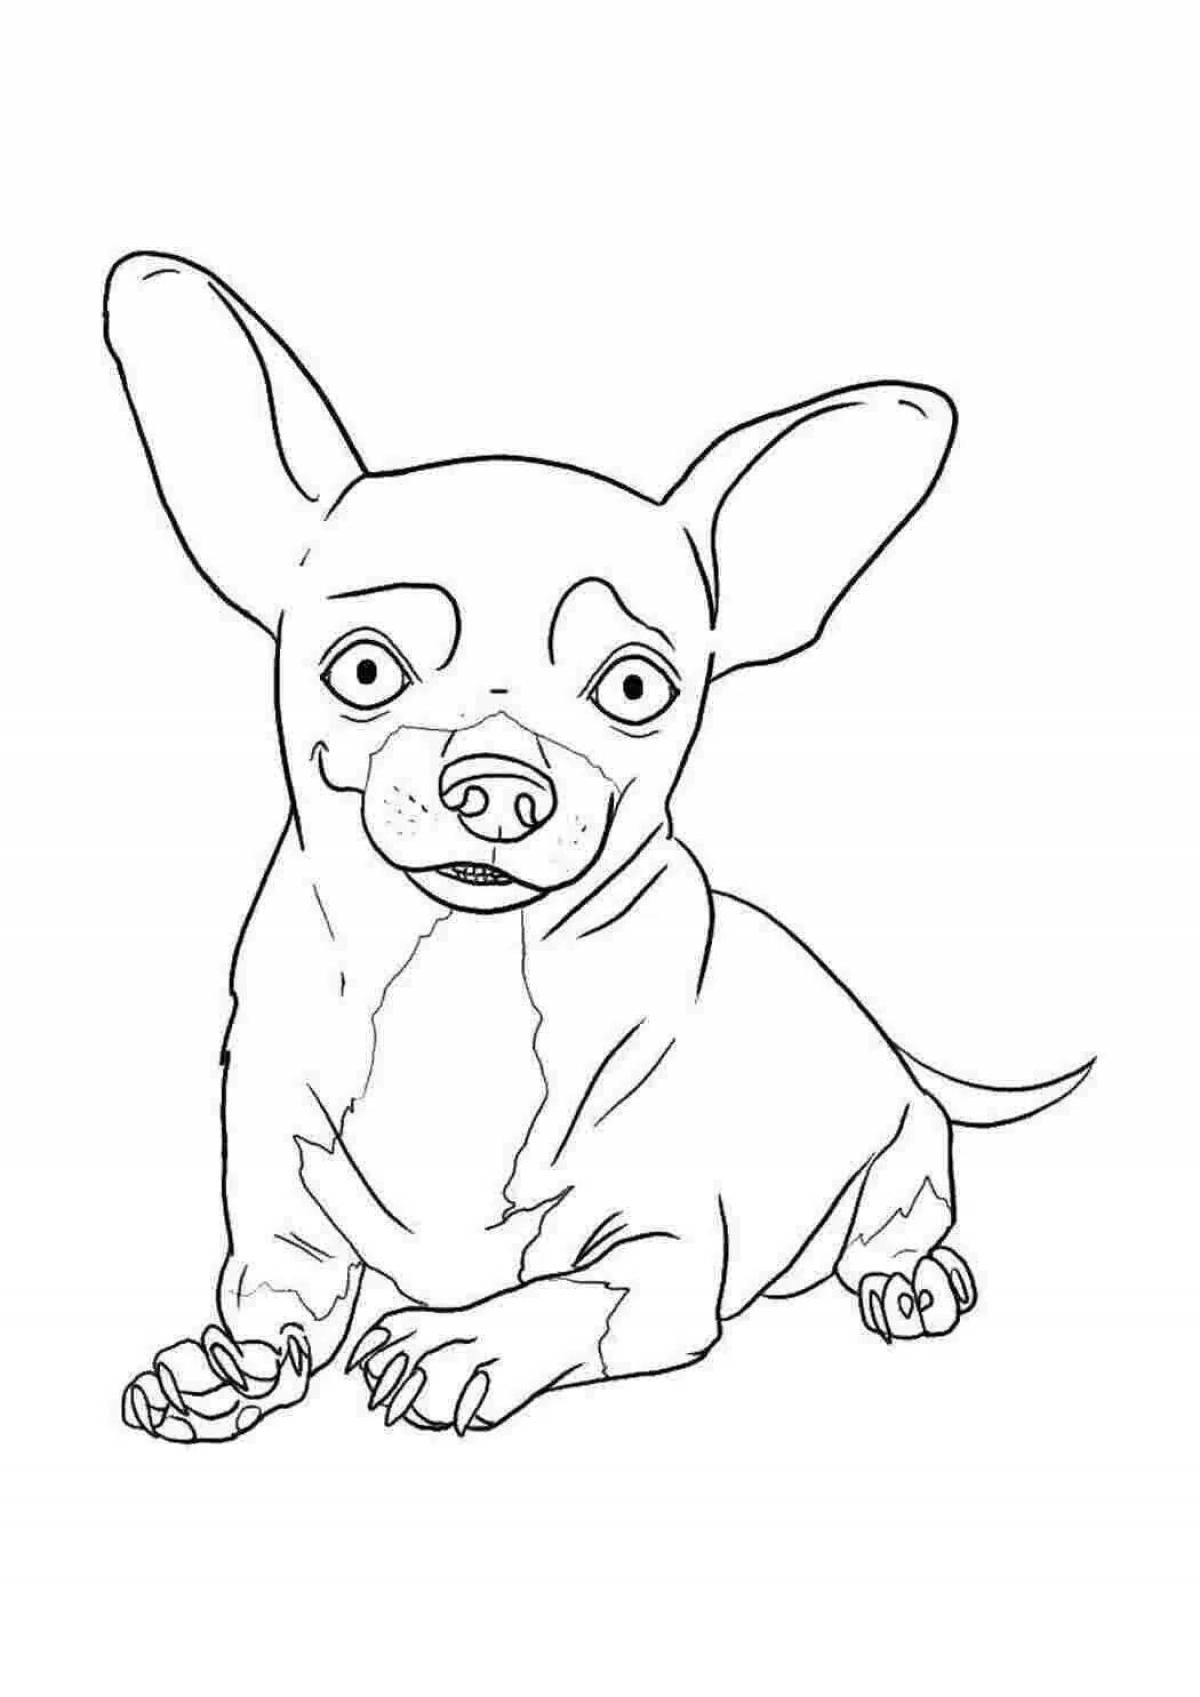 A fun chihuahua coloring book for kids